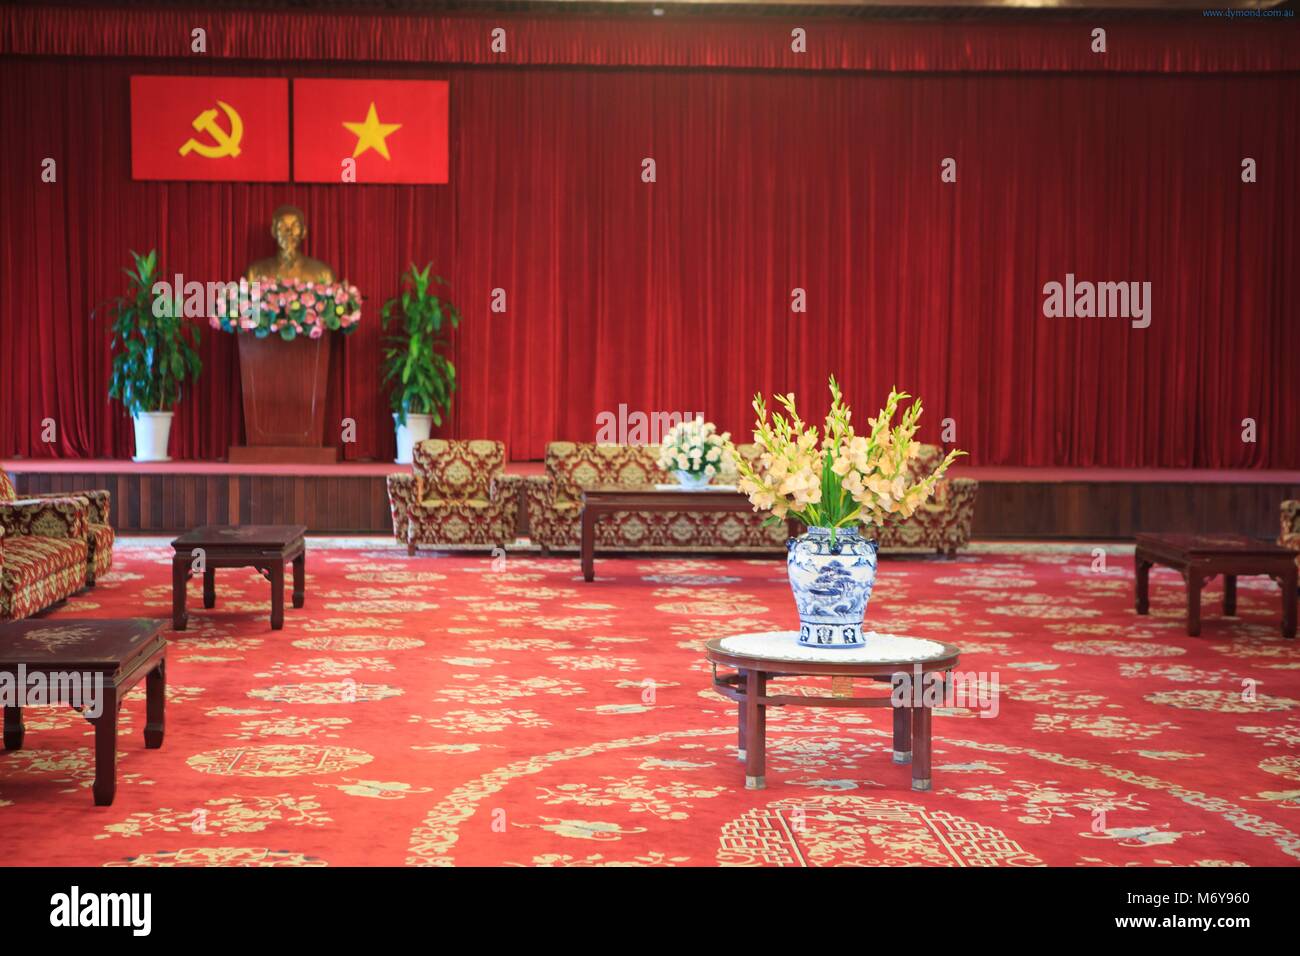 A state room within the Independence Place, Ho Chi Minh City, Vietnam Stock Photo